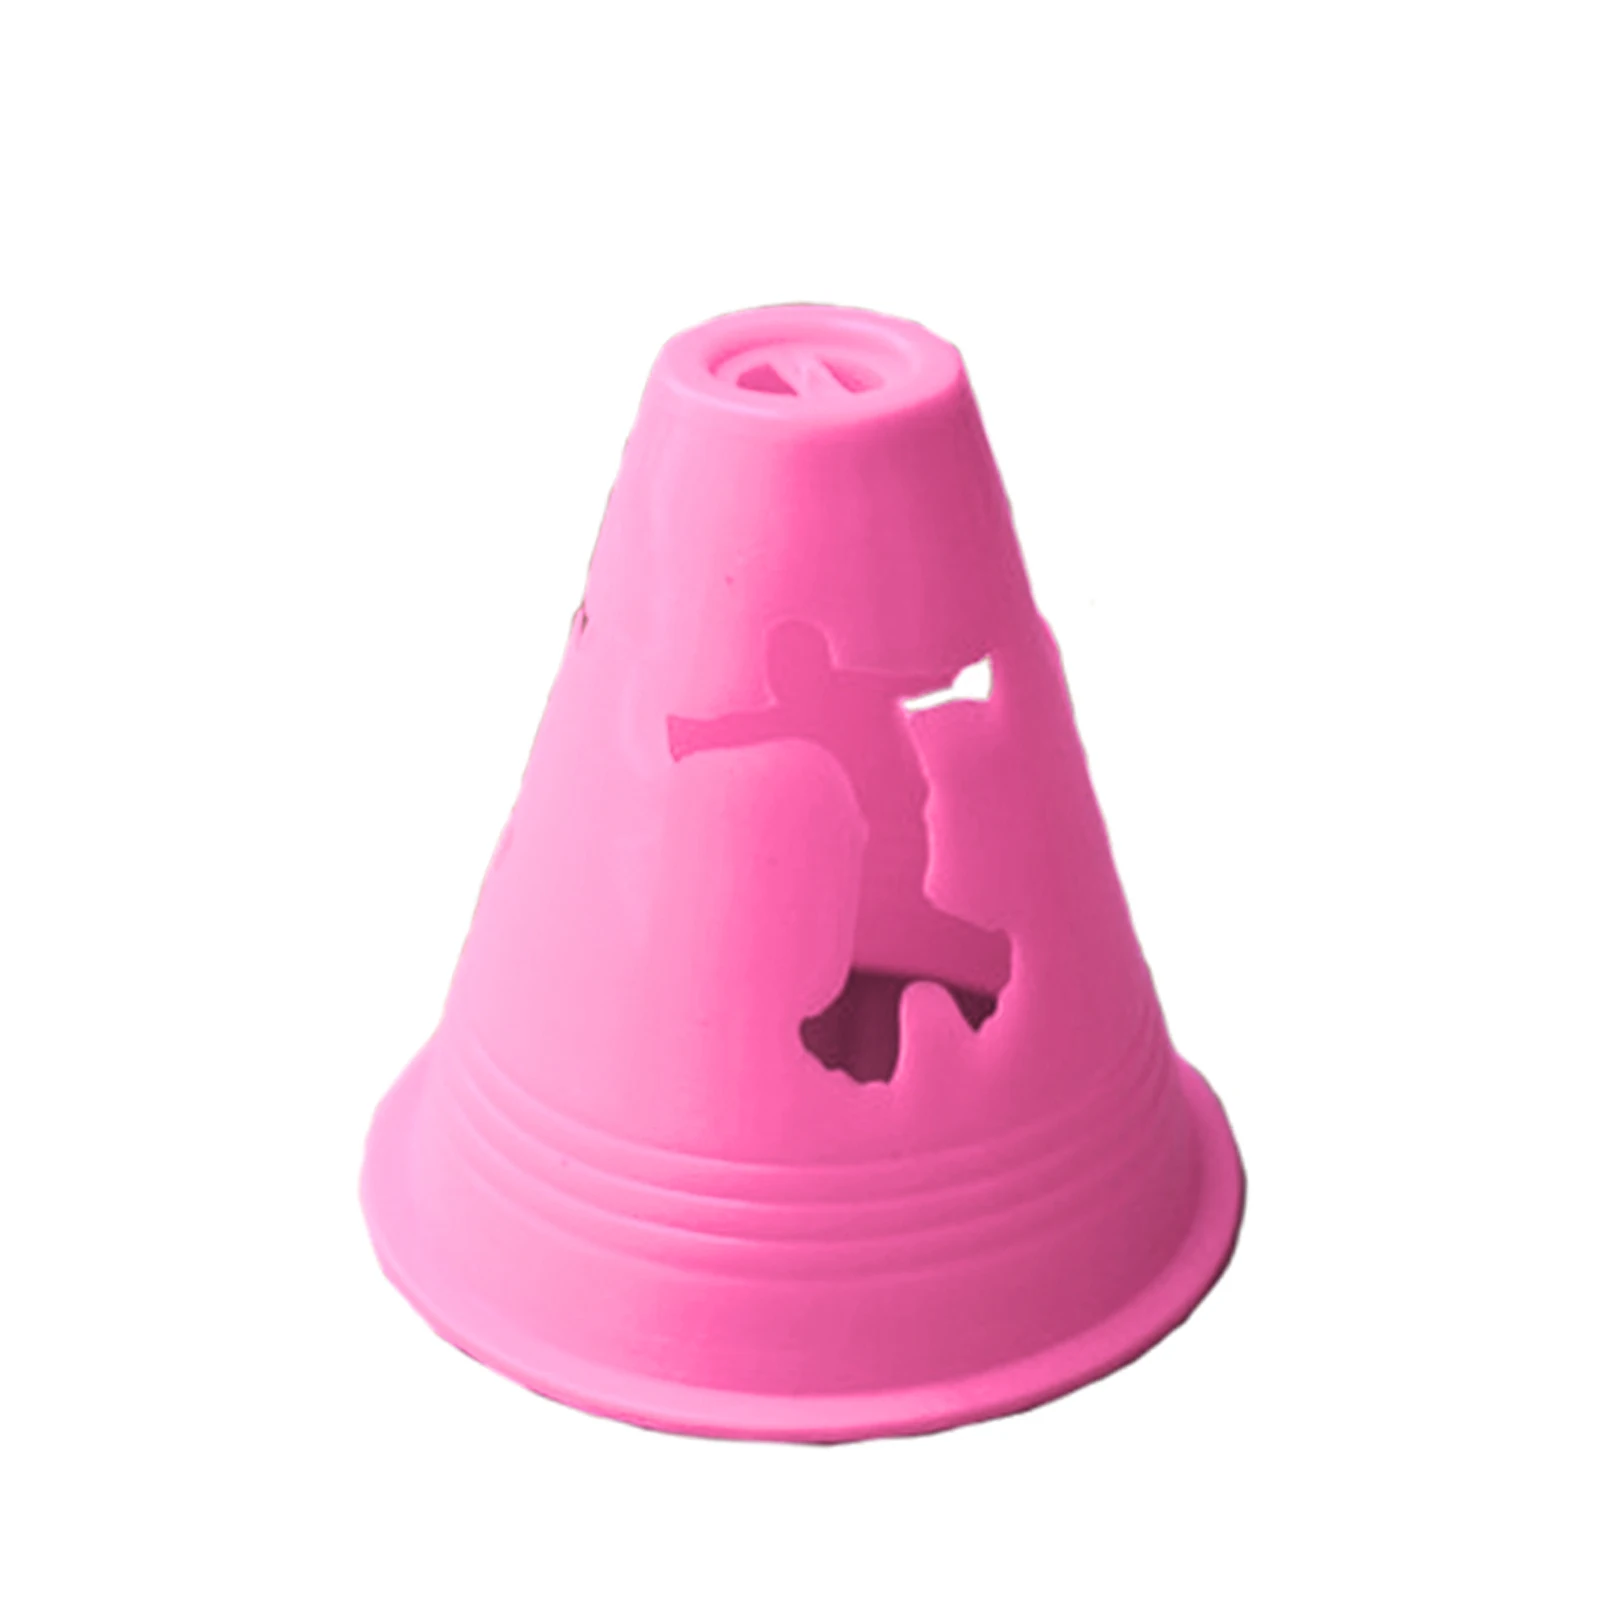 

20pcs/pack Football Training Marking Cone Agility Stadium Inline Skate Pile Cup Equipment Obstacle Rugby Speed Sport Free Slalom